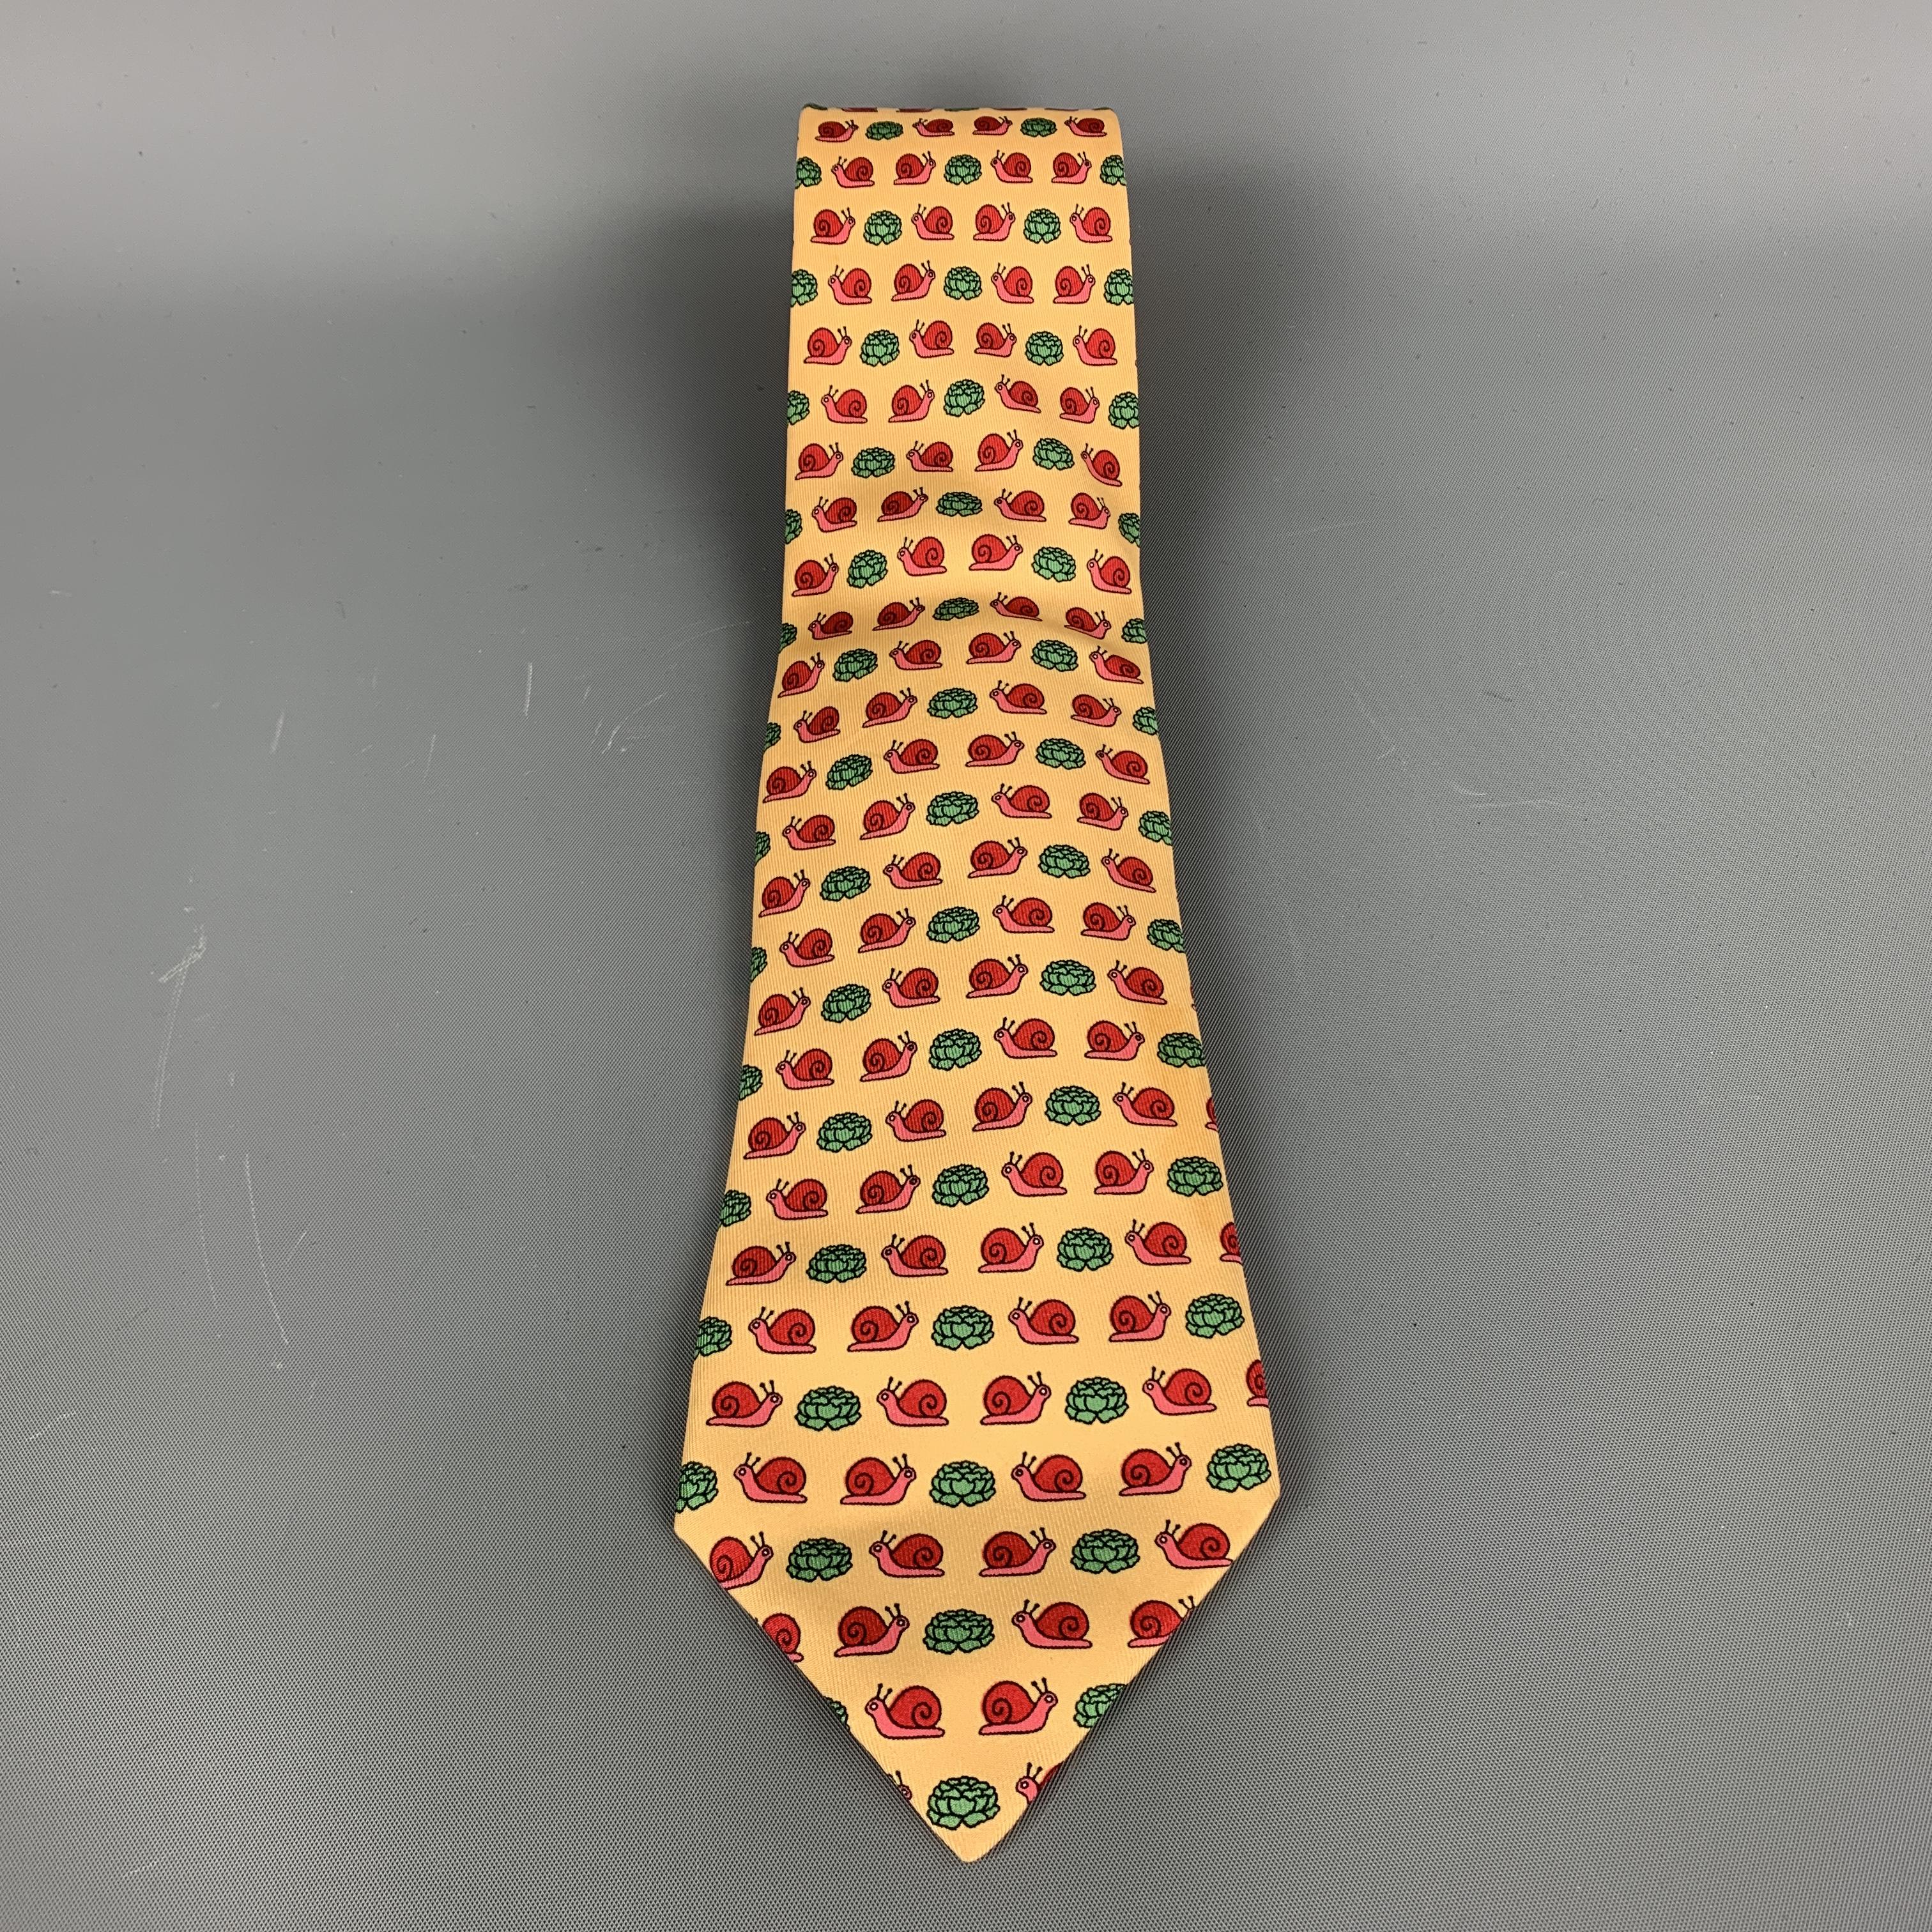 Vintage Hermes necktie comes in yellow and white silk twill with all over 